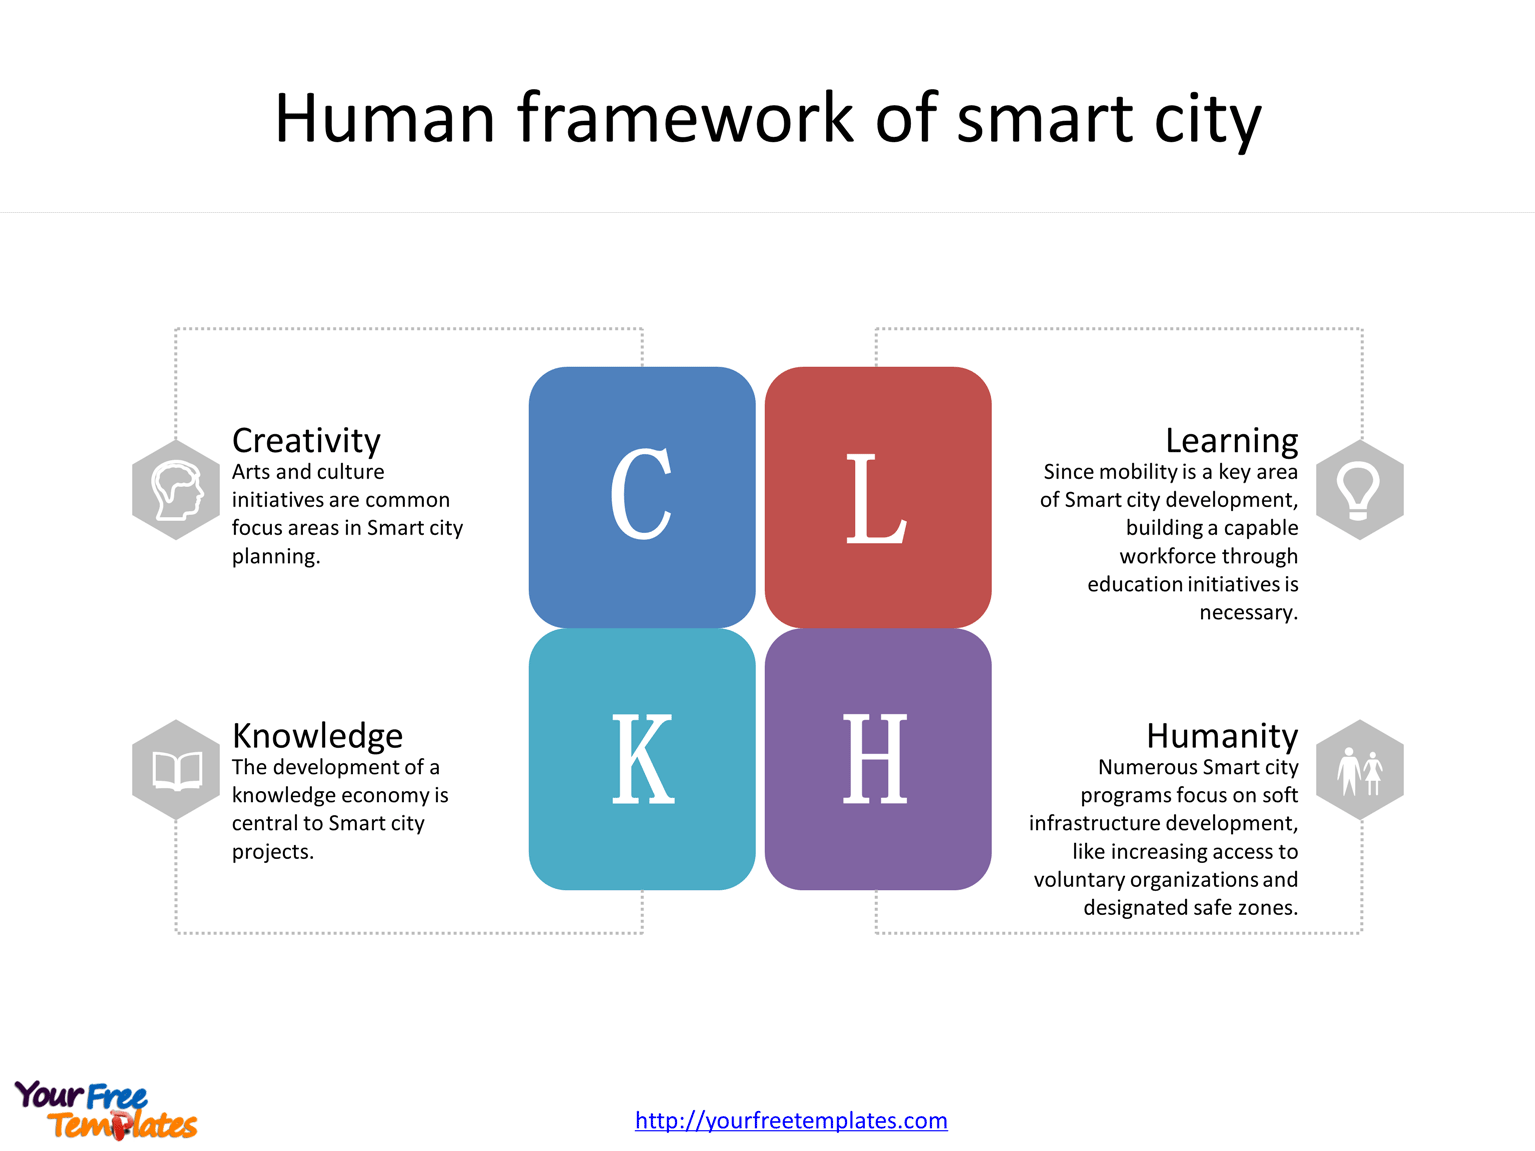 A Smart city is an urban area that uses different types of electronic Internet of things (IoT) sensors to collect data and then use these data to manage assets and resources efficiently.